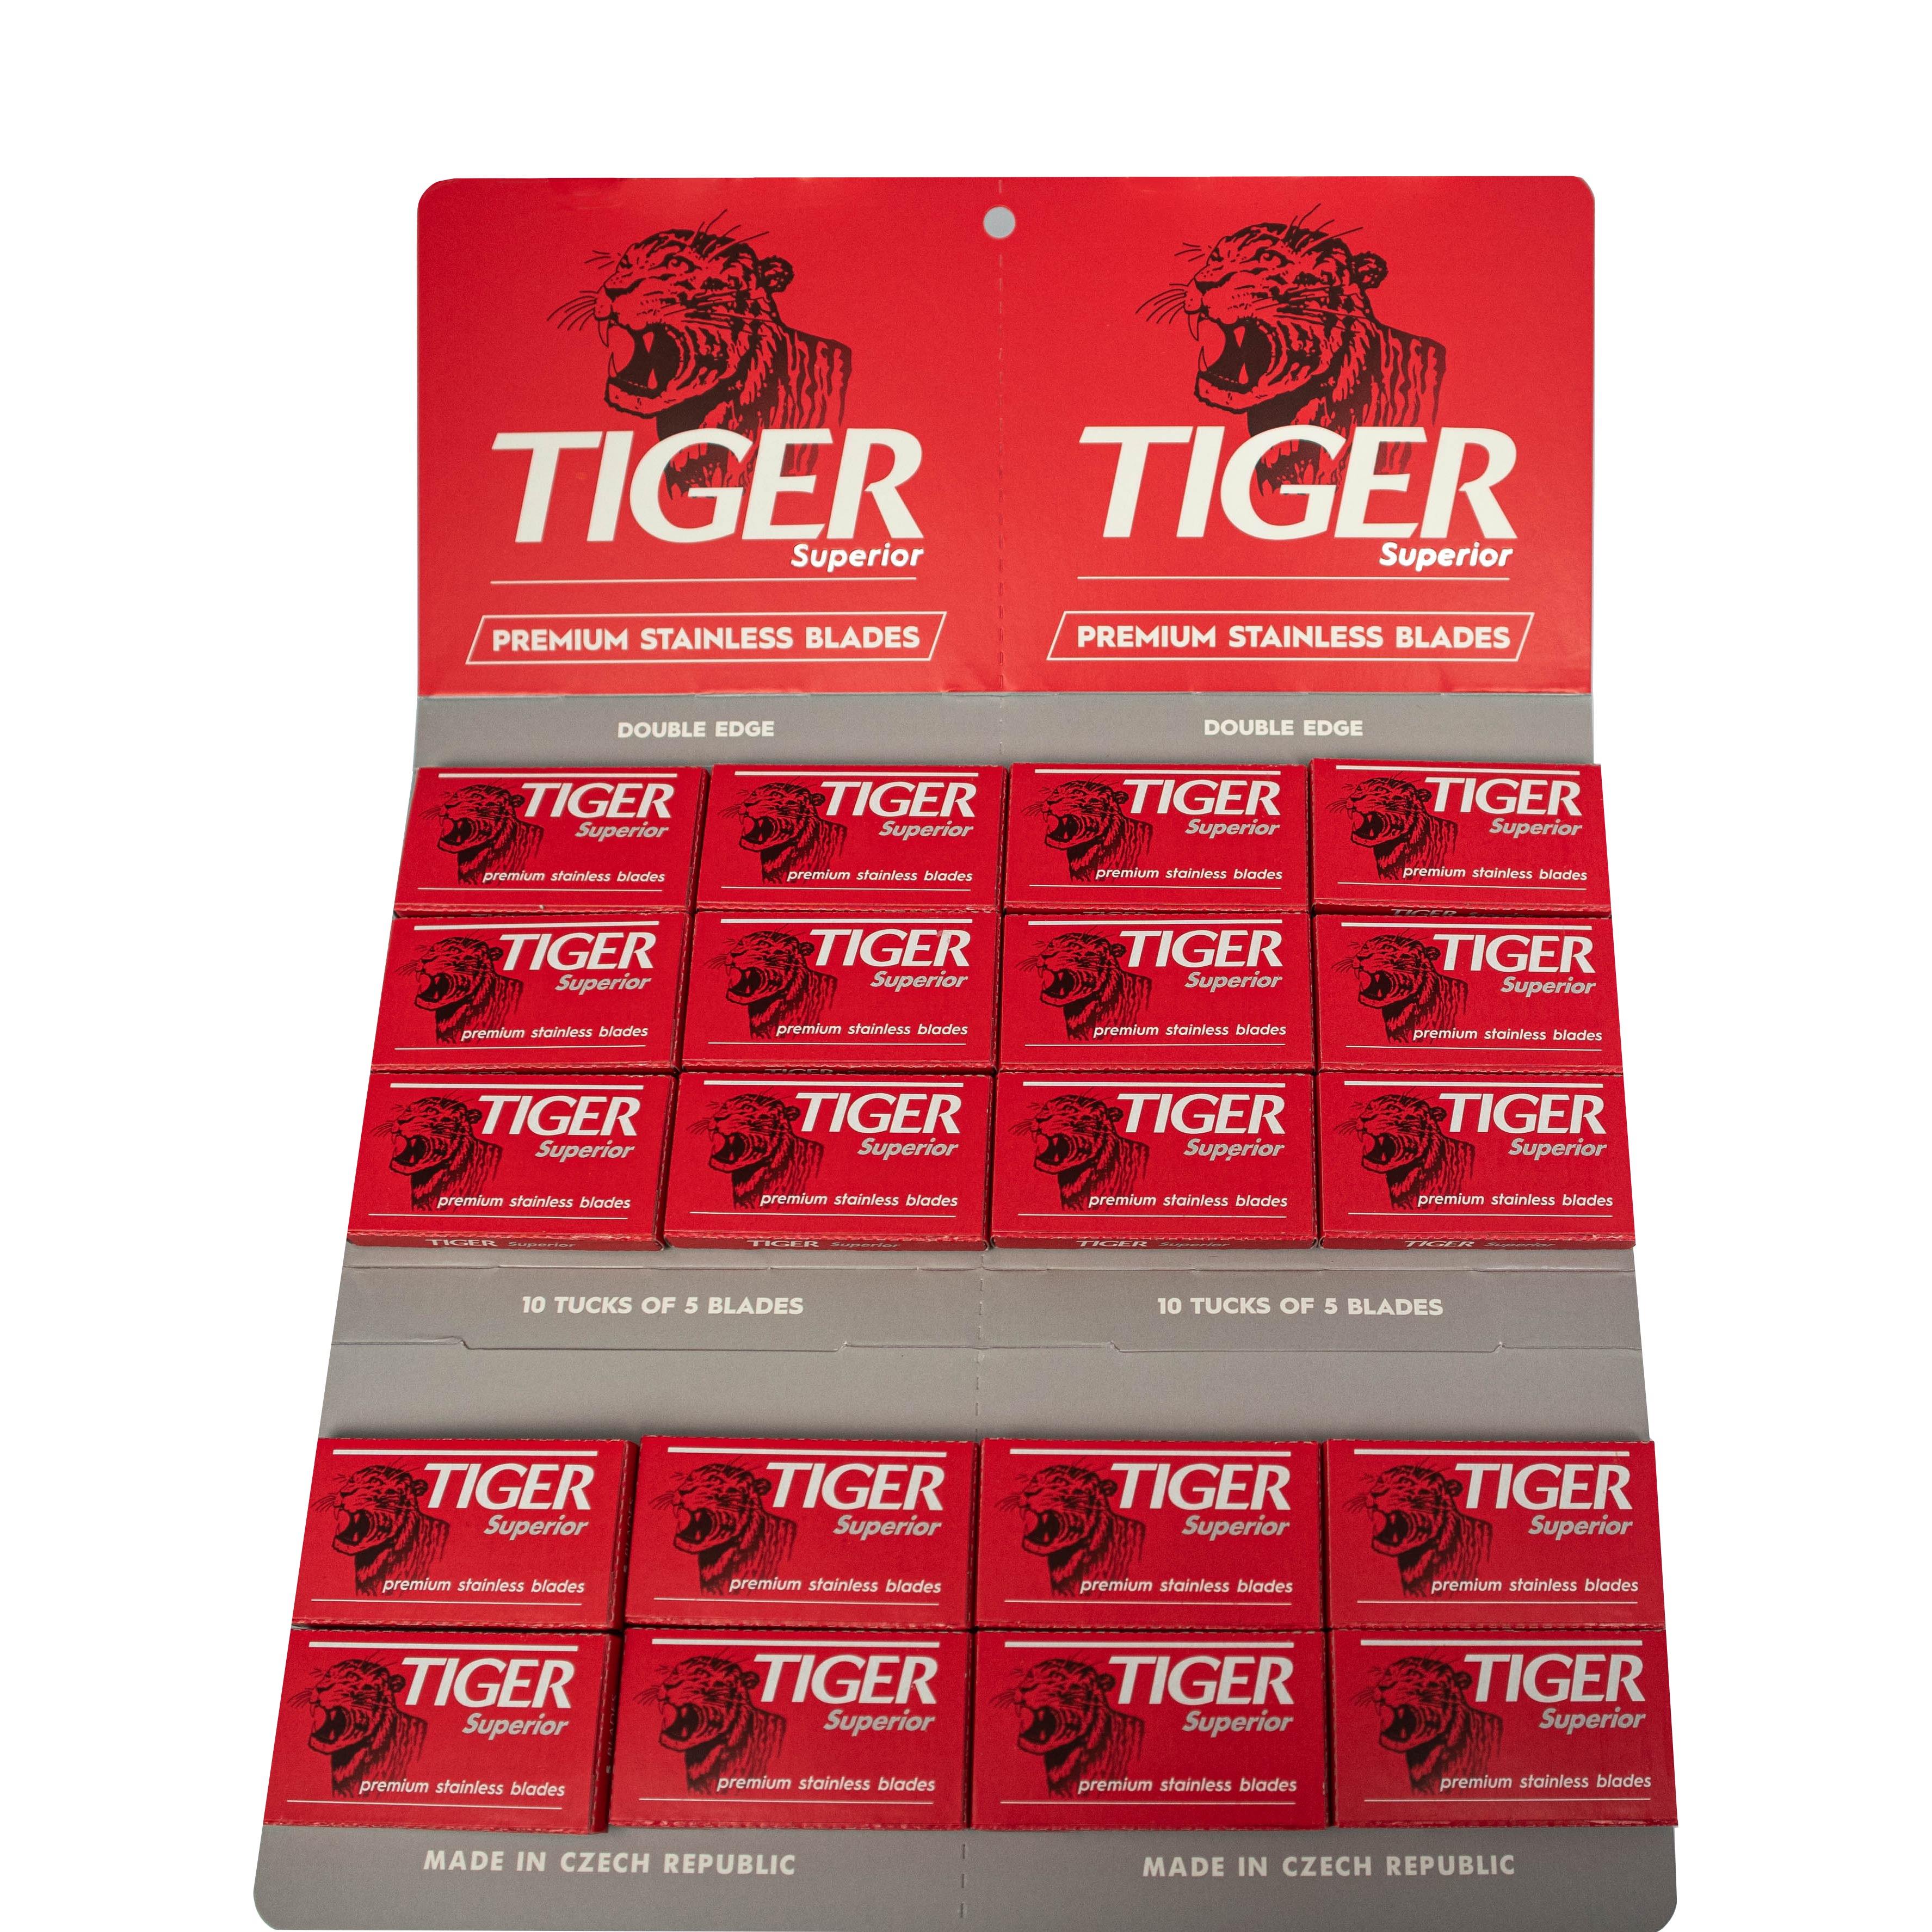 1 Verpakking Tiger Superior Double Edge Blades - 1.1 - 1PACK-TIGER-SUP